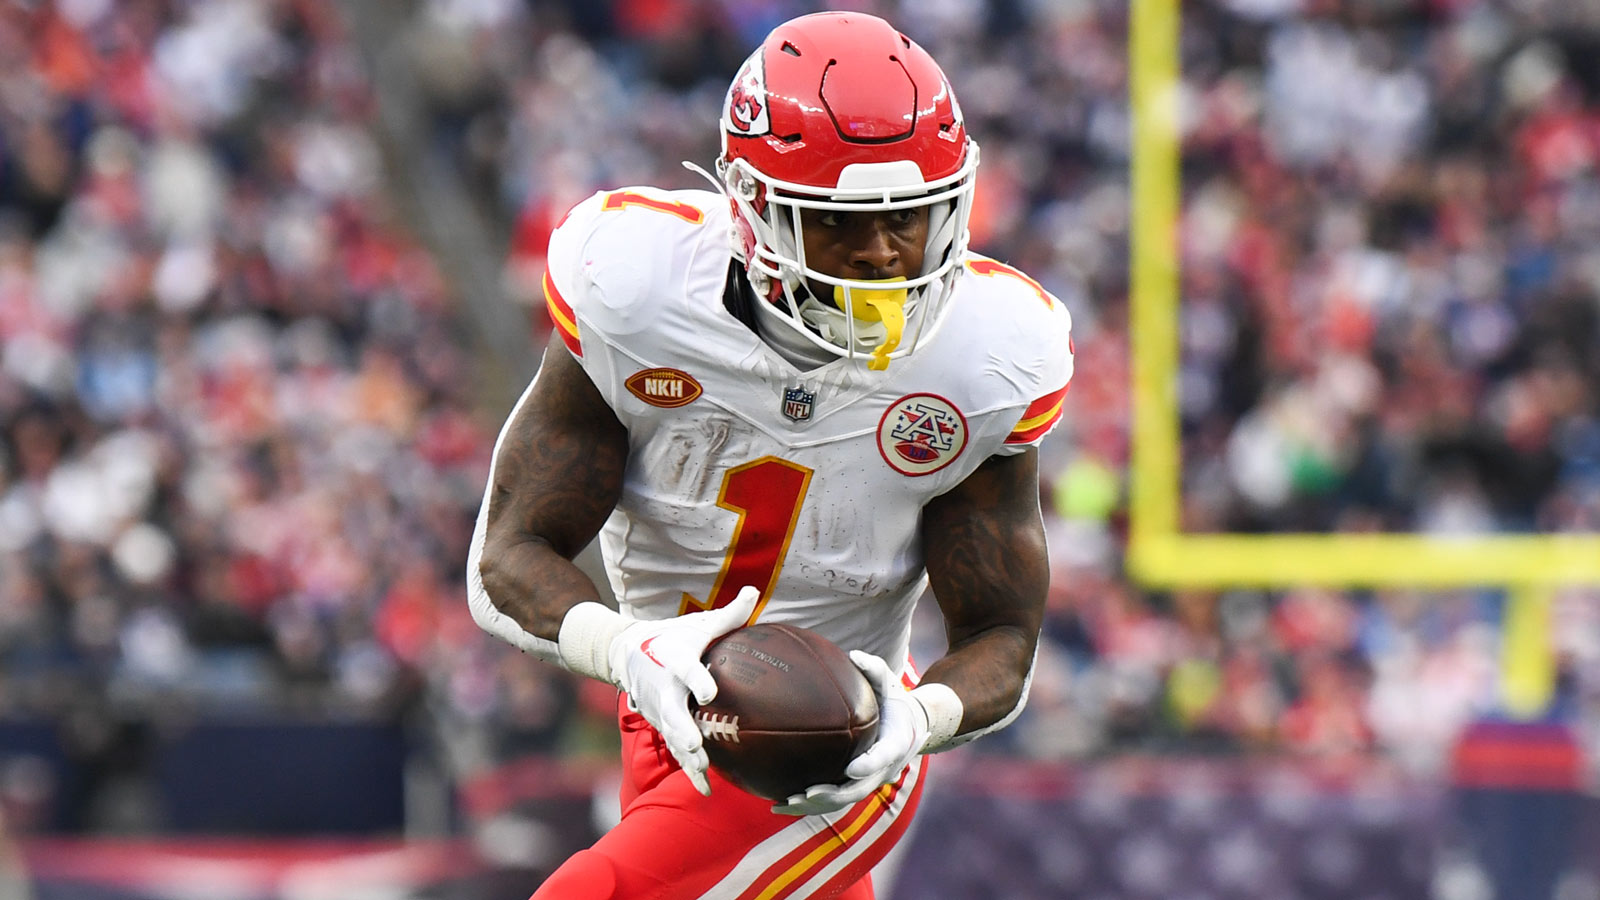 Chiefs place RB Jerick McKinnon on Reserved/Injured list